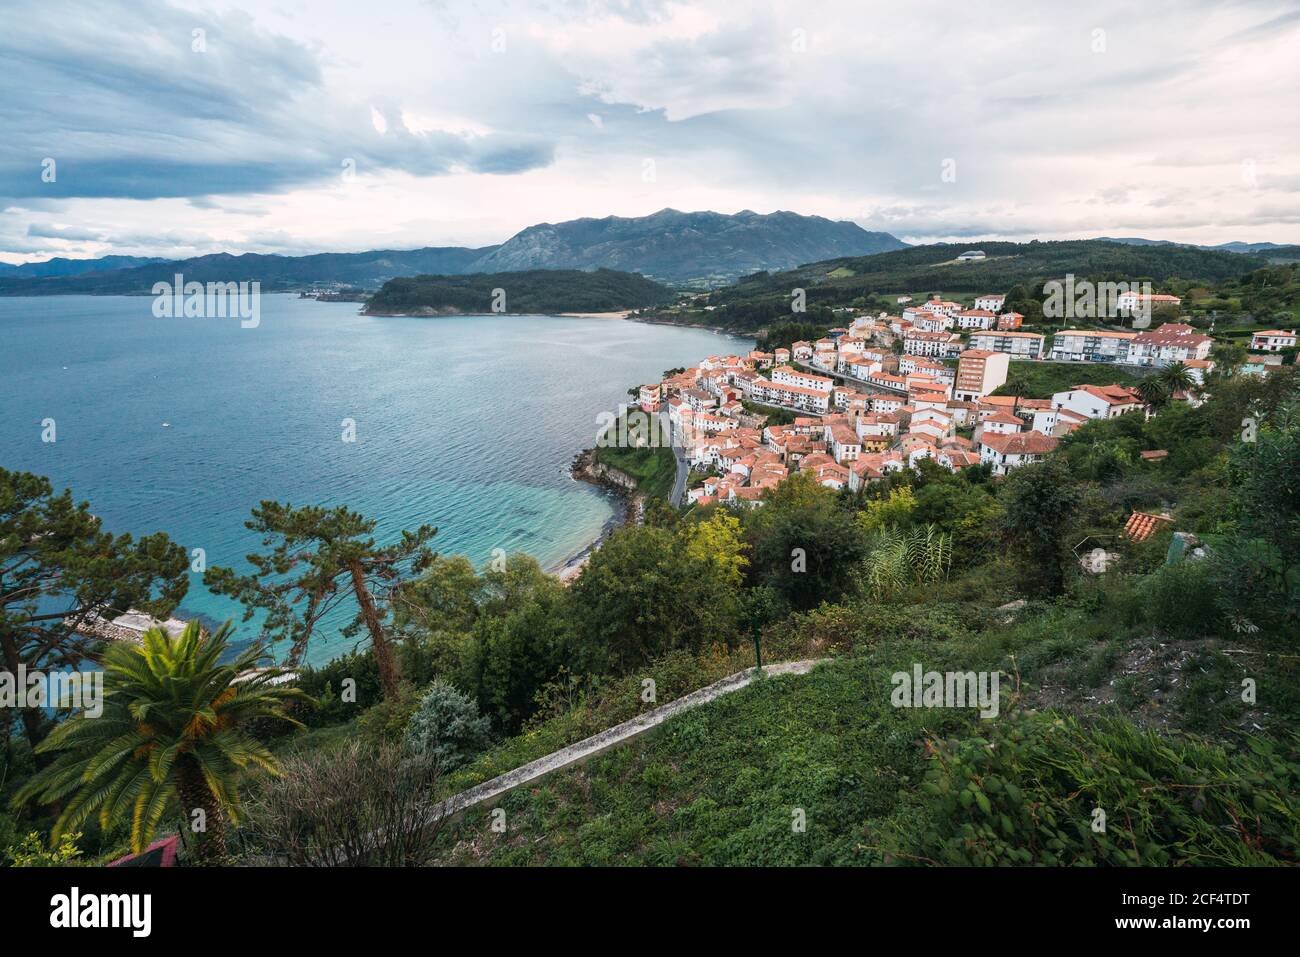 Drone view of peaceful seashore with green trees and small town with red roofs locating near blue sea and mountain ridge against blue cloudy sky Stock Photo